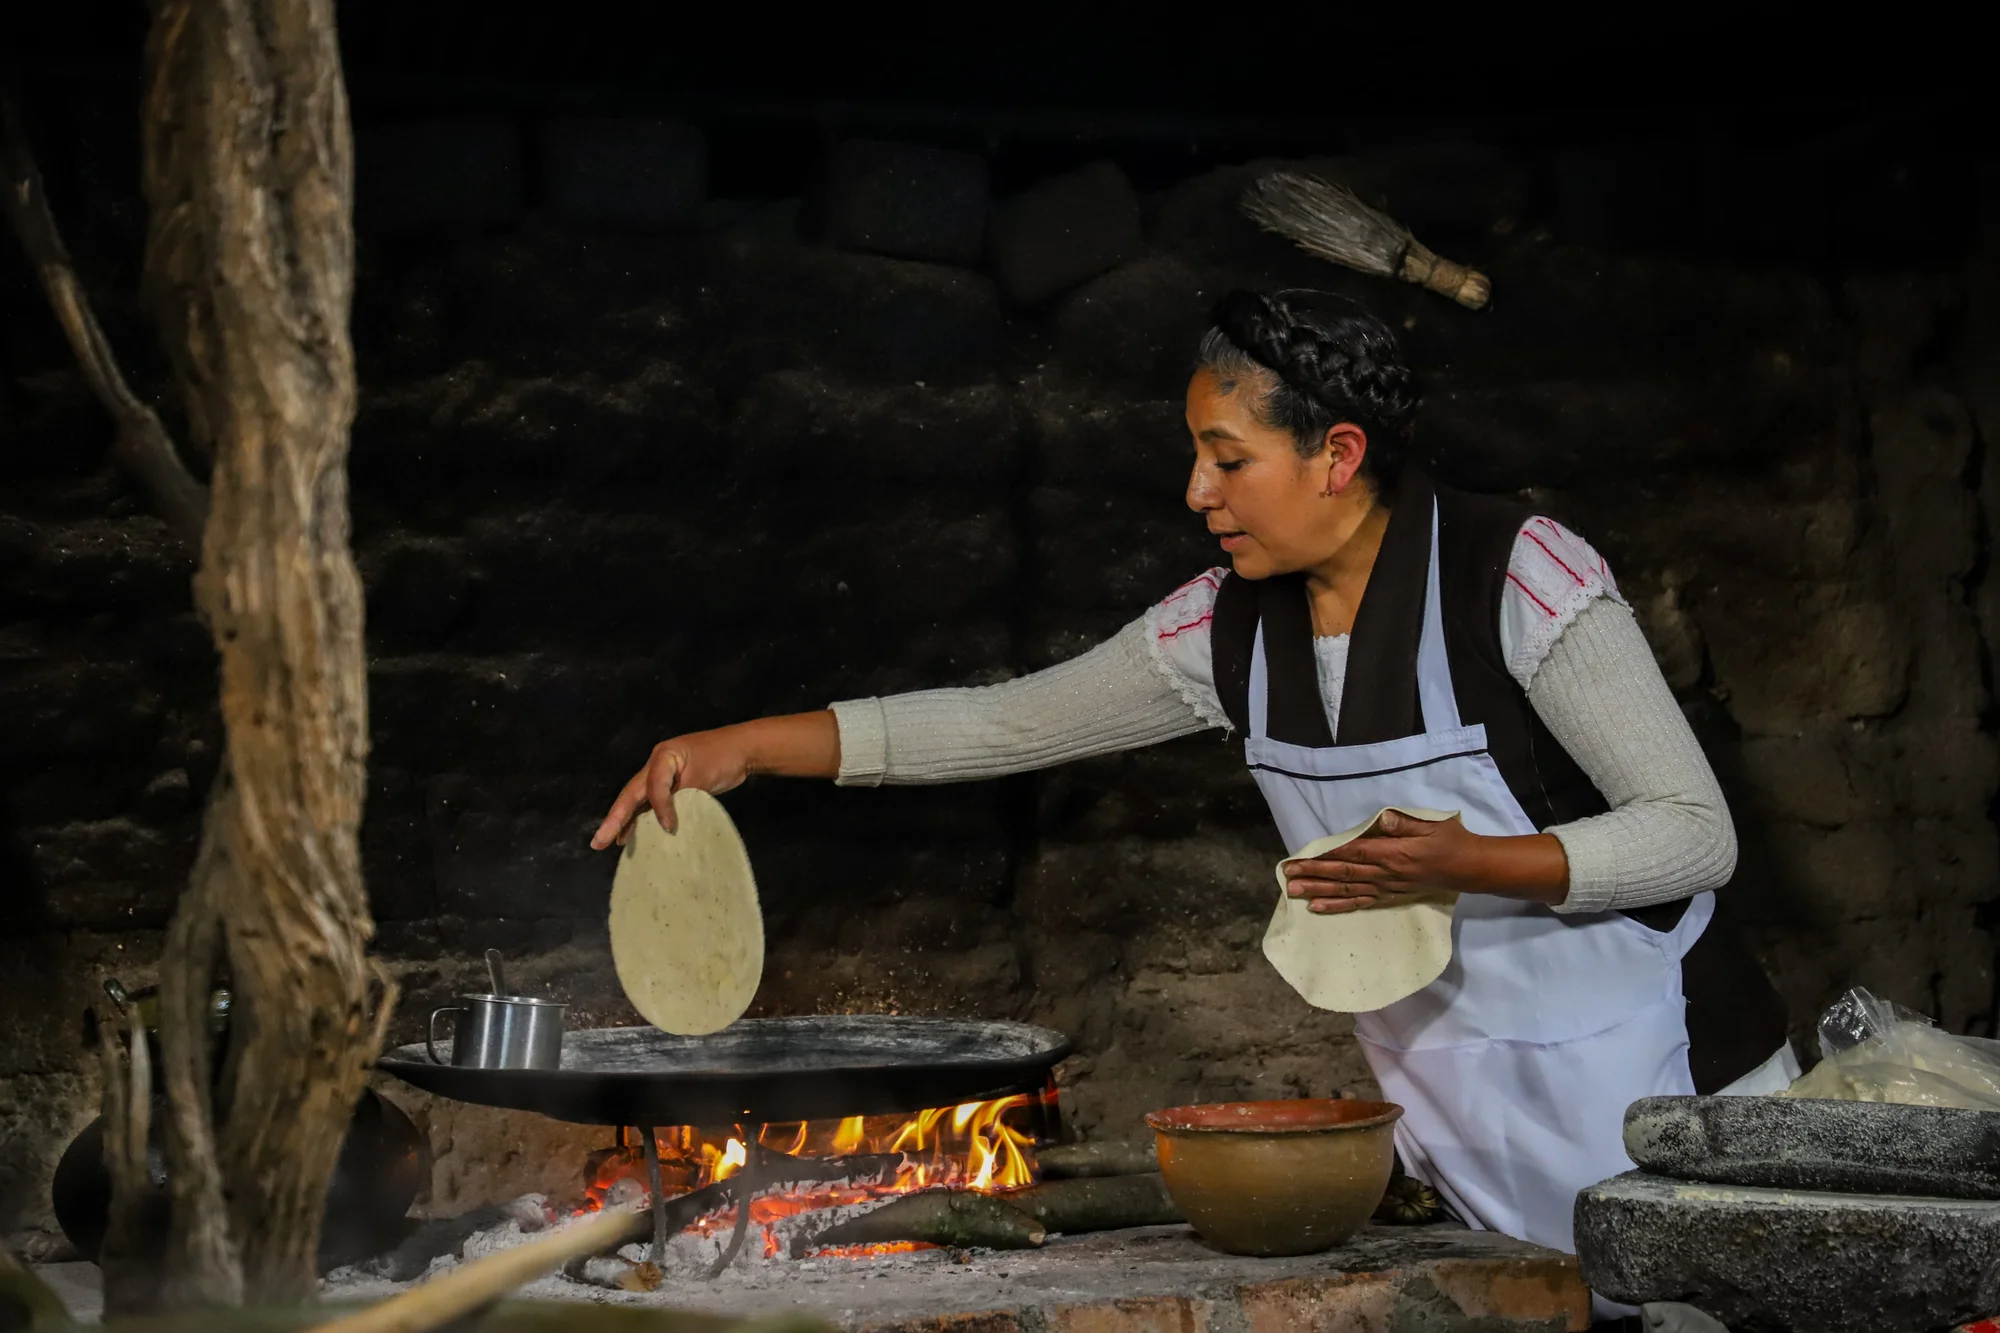 A woman wearing an apron putting a tortilla on a pan over an open flame